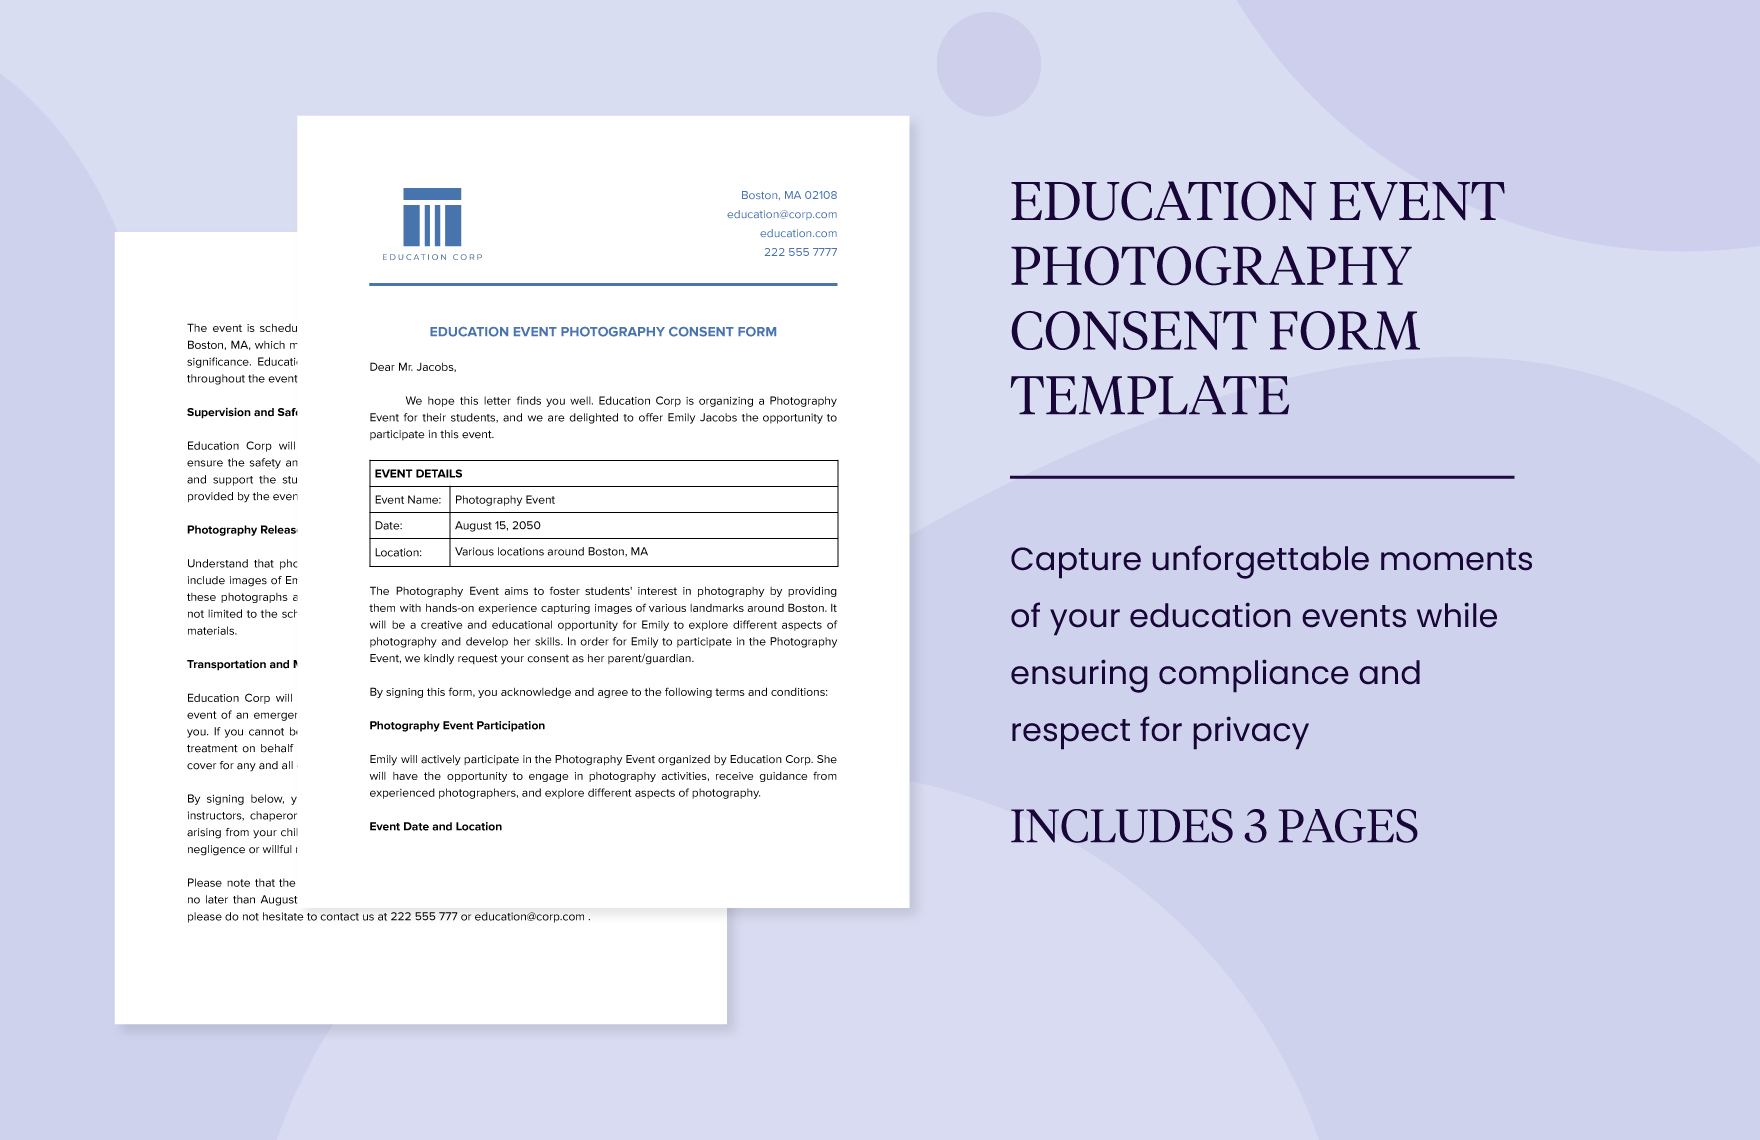 Education Event Photography Consent Form Template